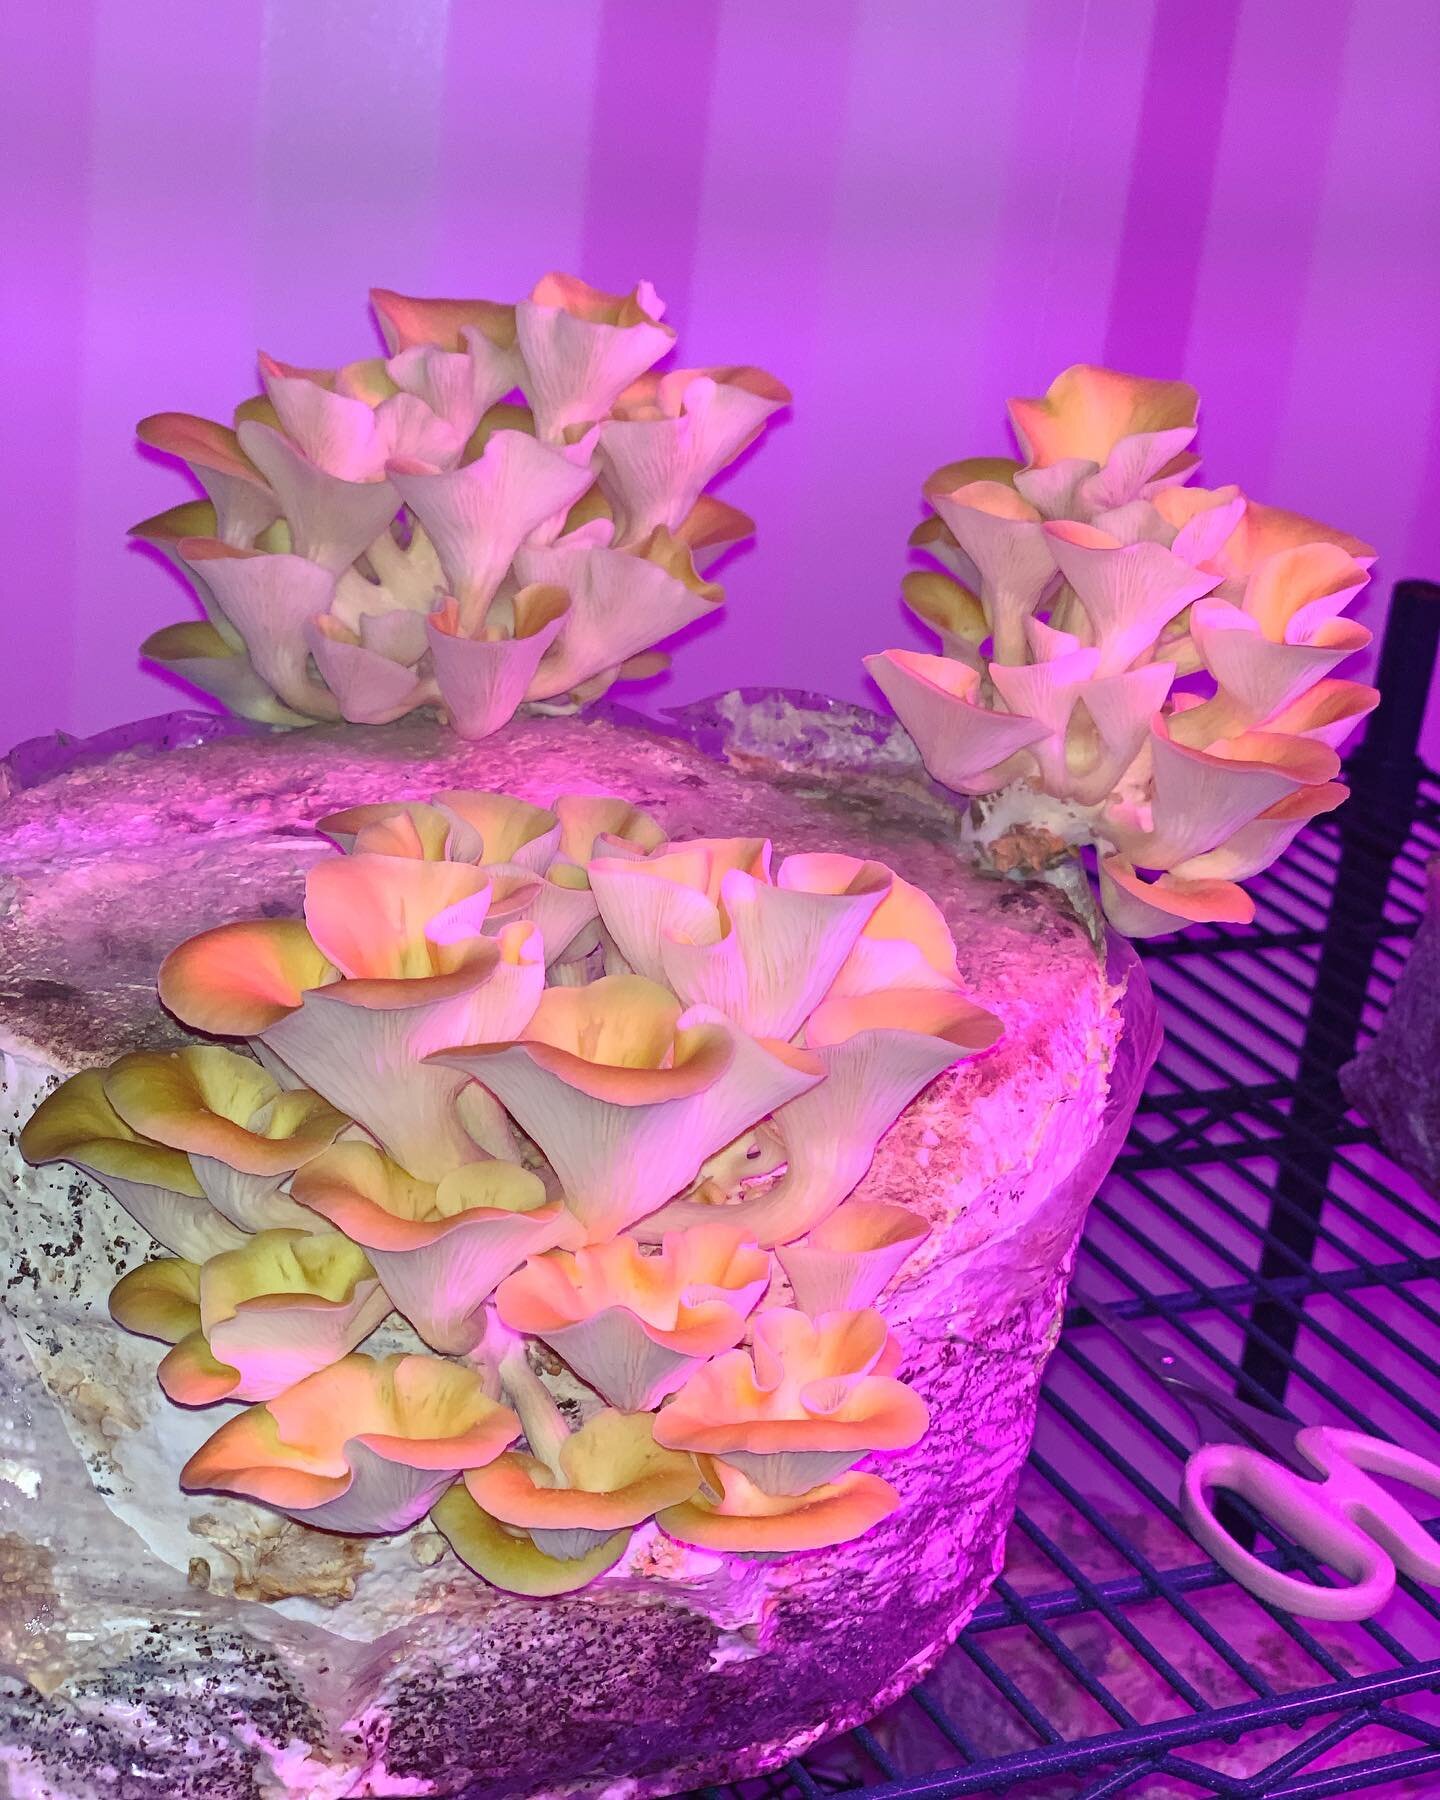 We make our own fruiting blocks using high quality materials to provide the best food to our little mushroom buddies. This flush or Golden&rsquo;s was particularly beautiful 👍
.
.
.
.
Cheekee Greens Mushroom Farm 
#mushroomsofinstagram 
#mushrooms 
